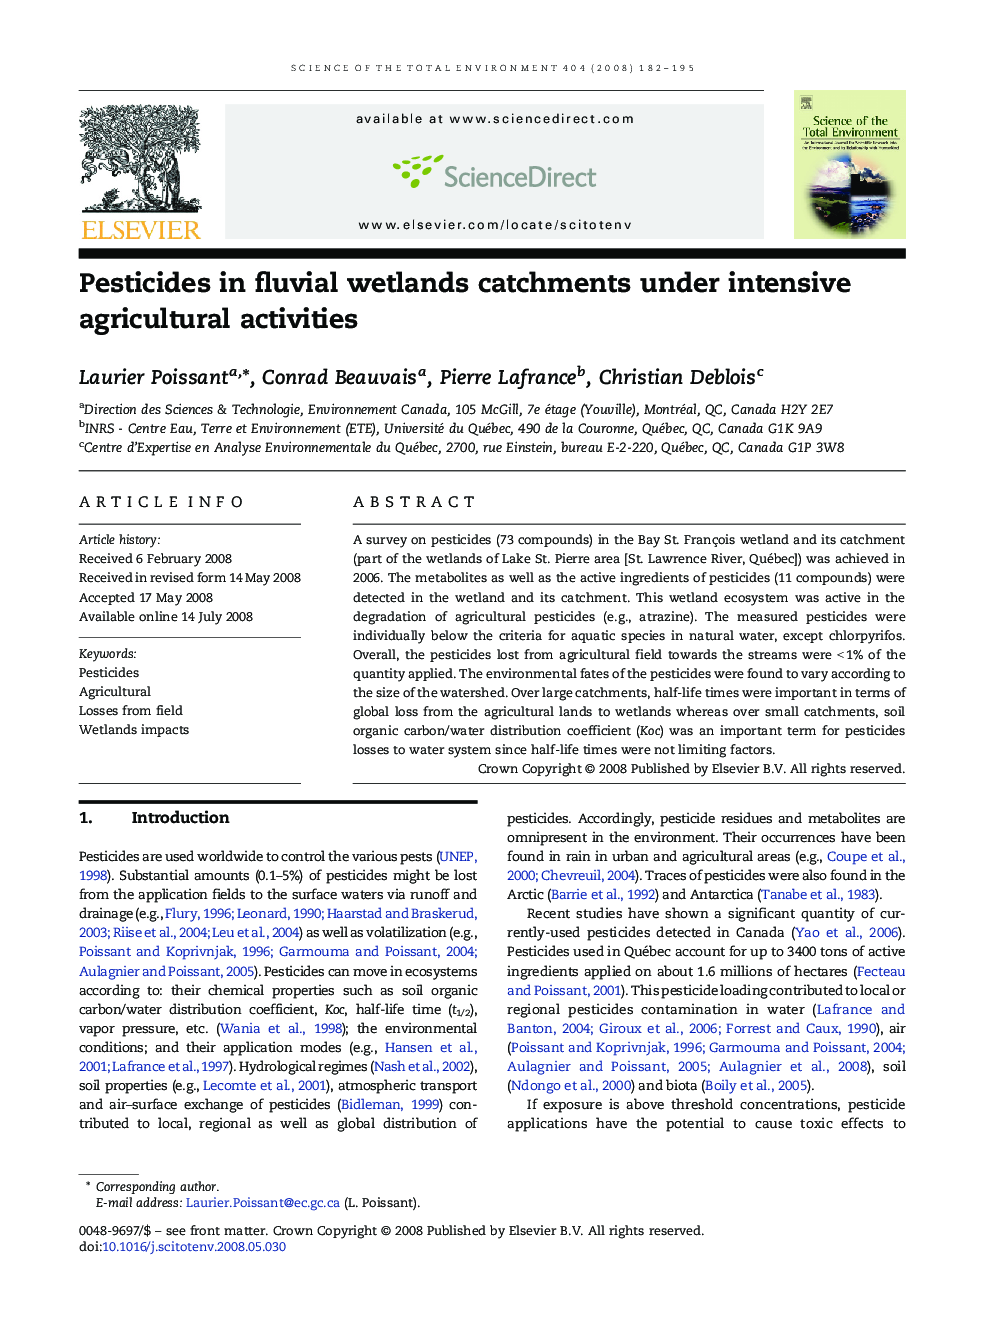 Pesticides in fluvial wetlands catchments under intensive agricultural activities